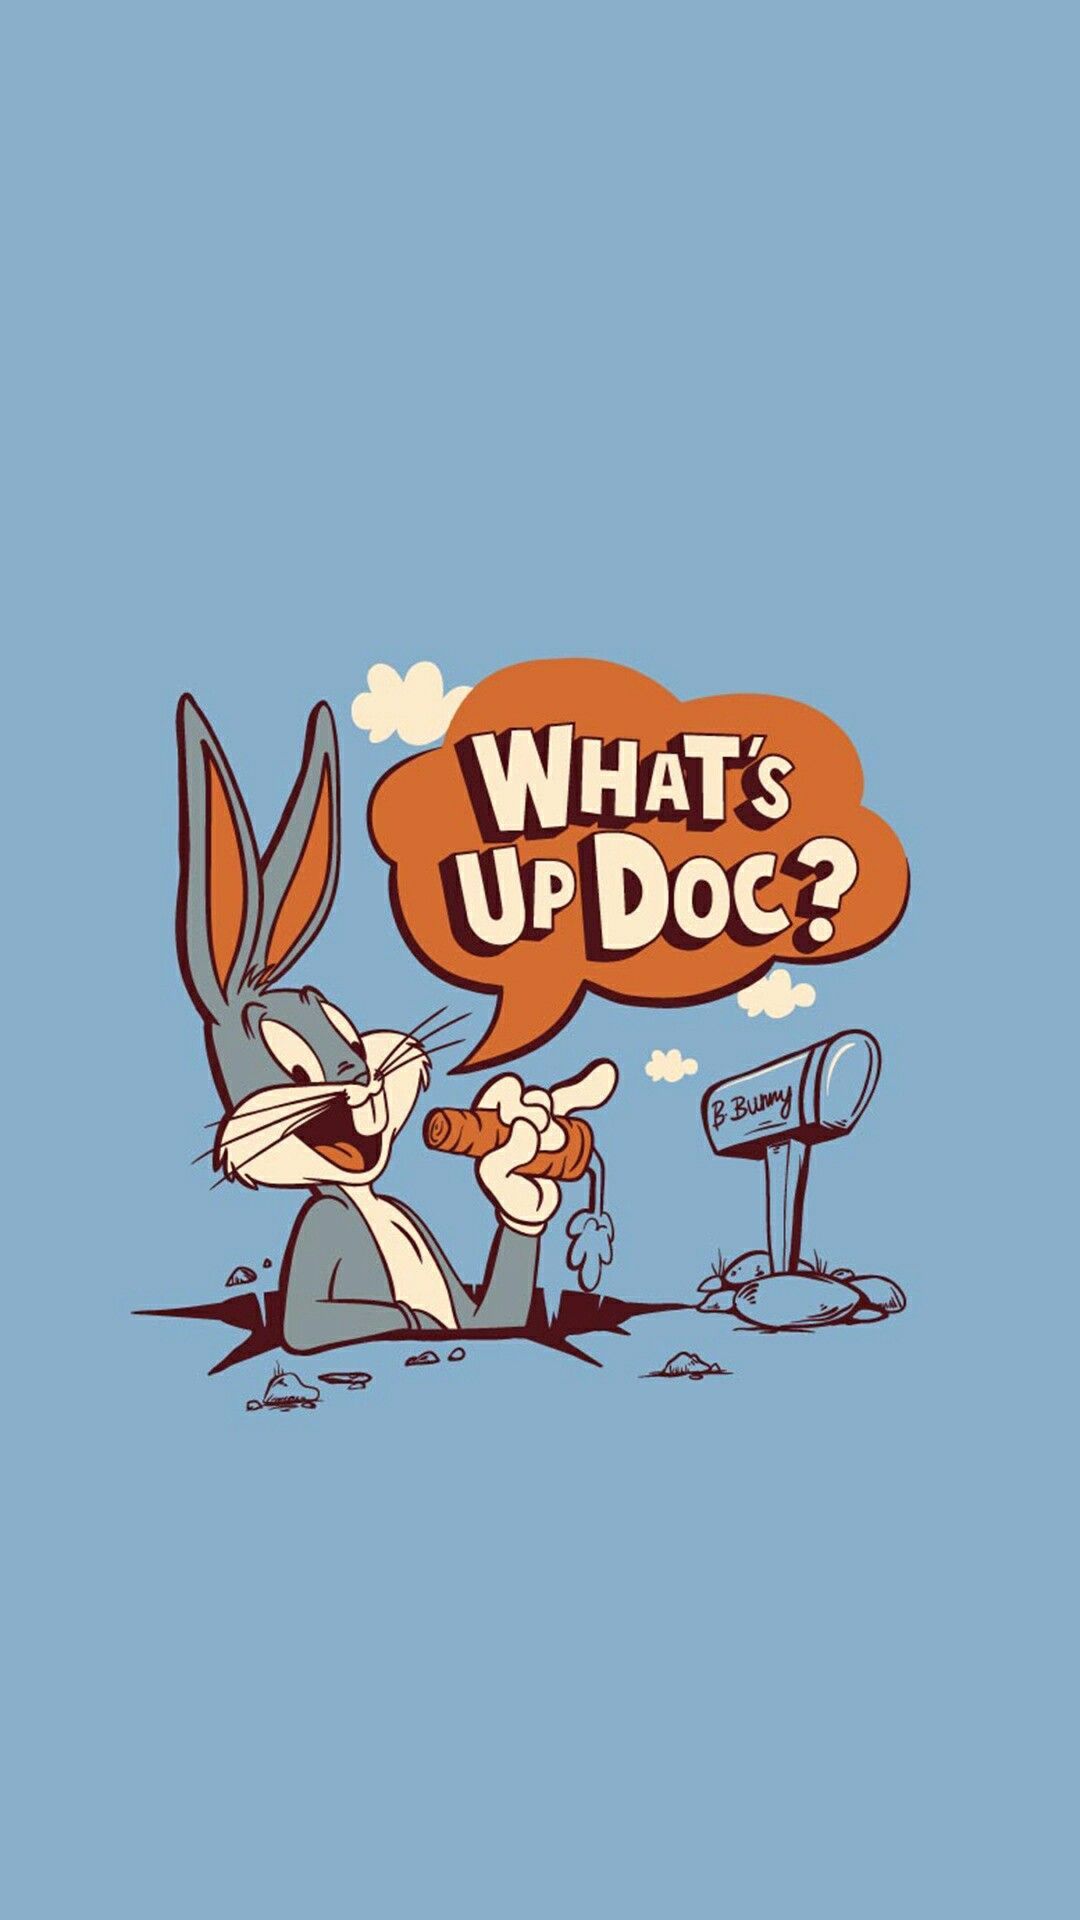 What's up doc? - Looney Tunes